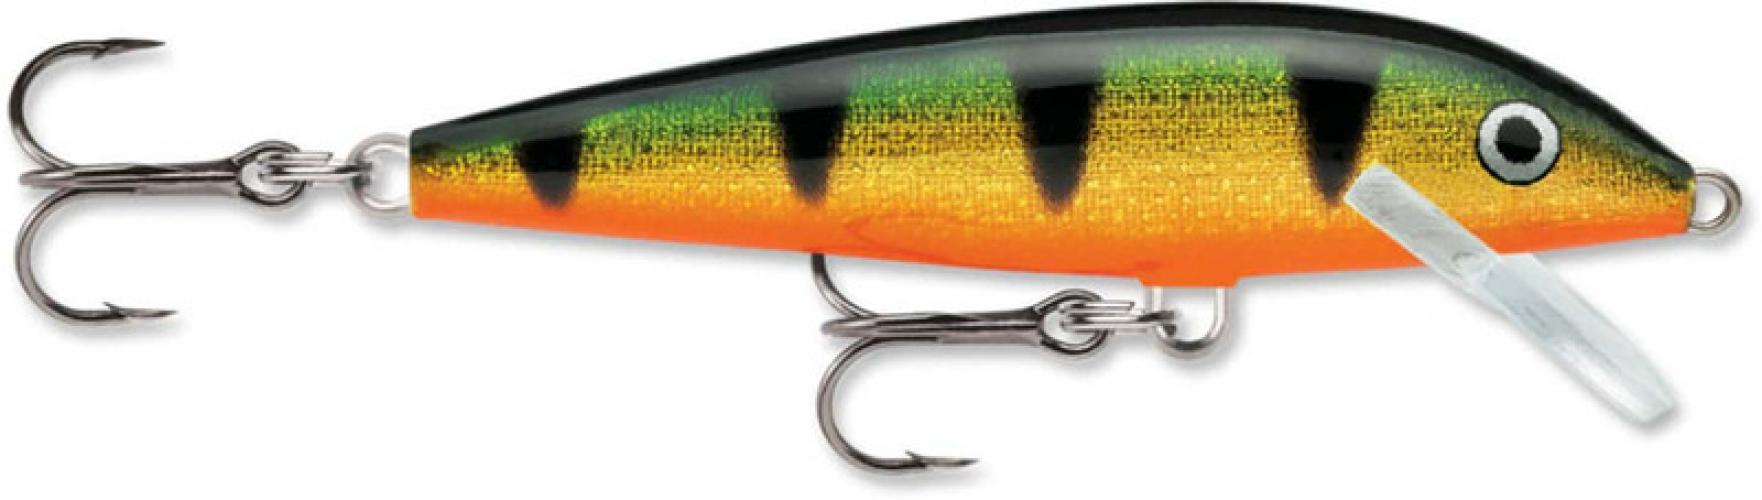 Rapala F05p Floating Lure Perch